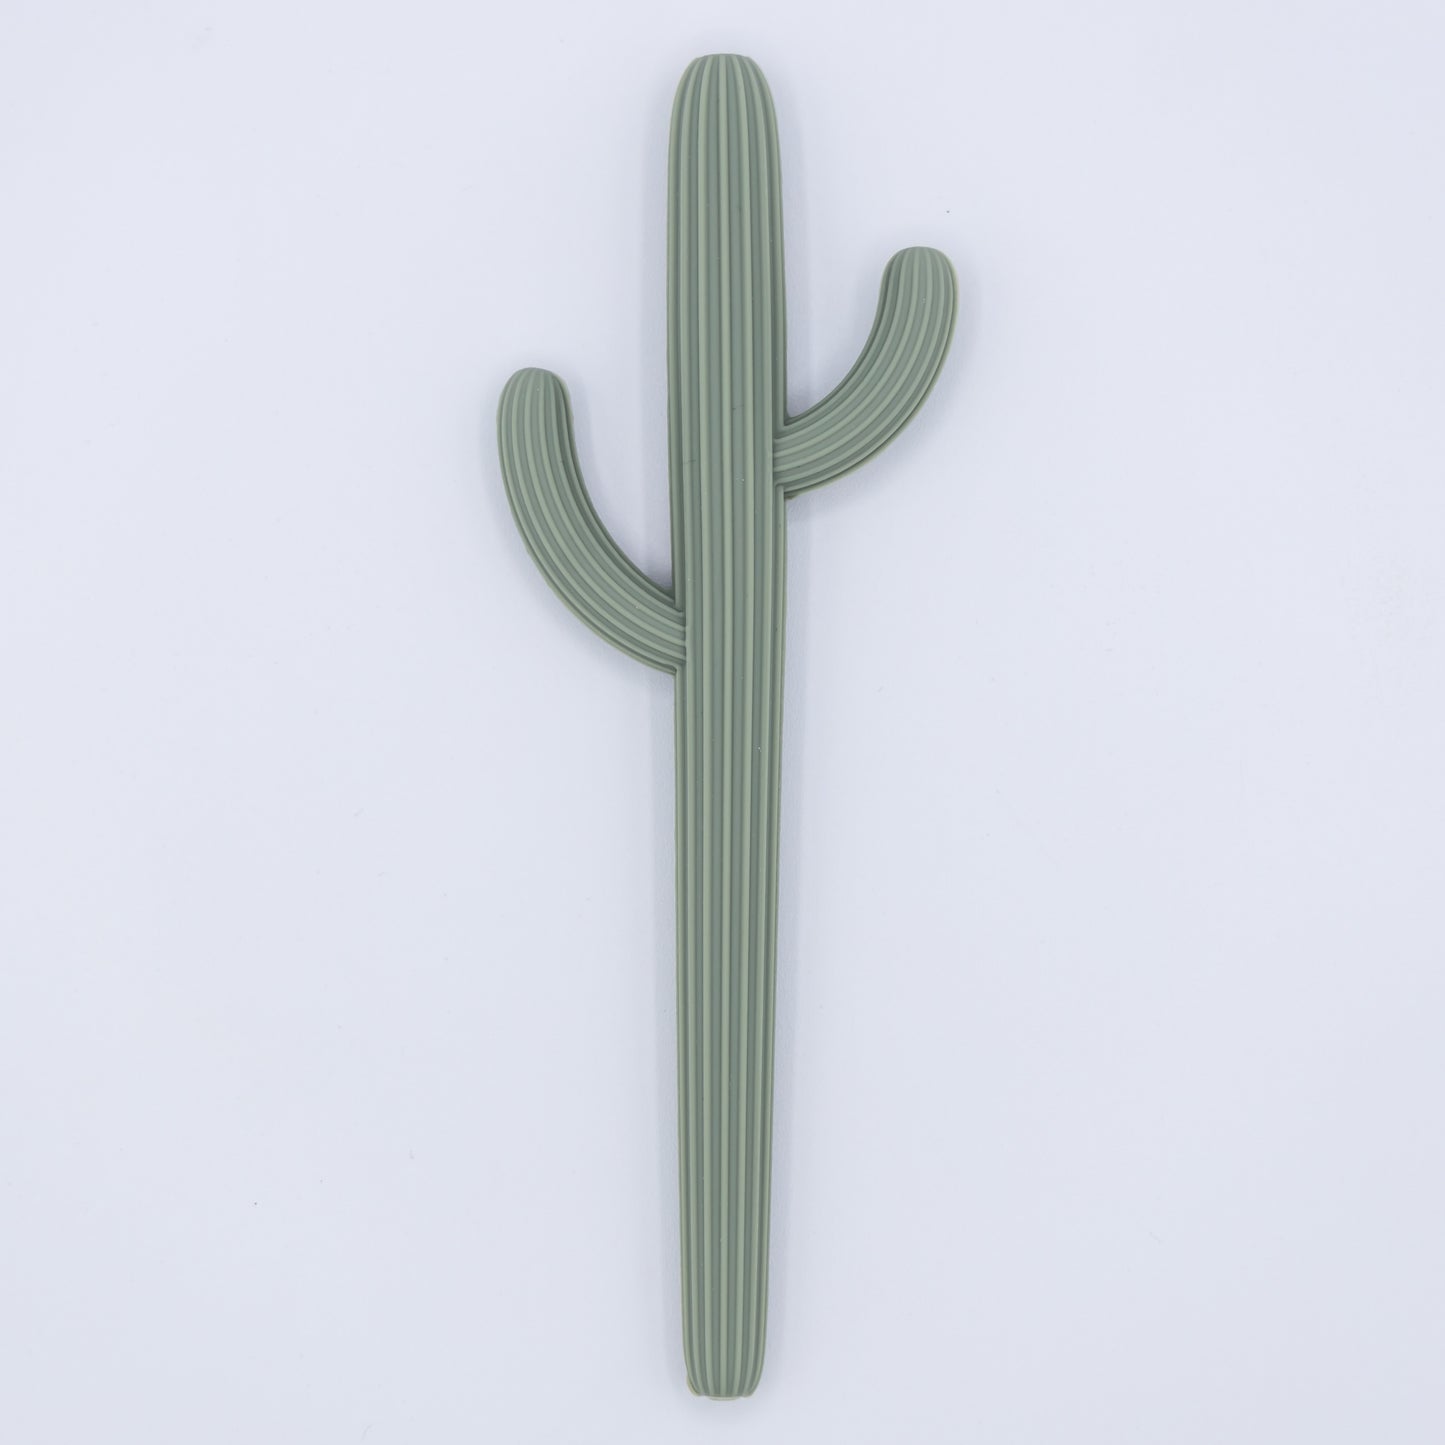 Cactus Teether/Straw – Cowkid Clothing Company